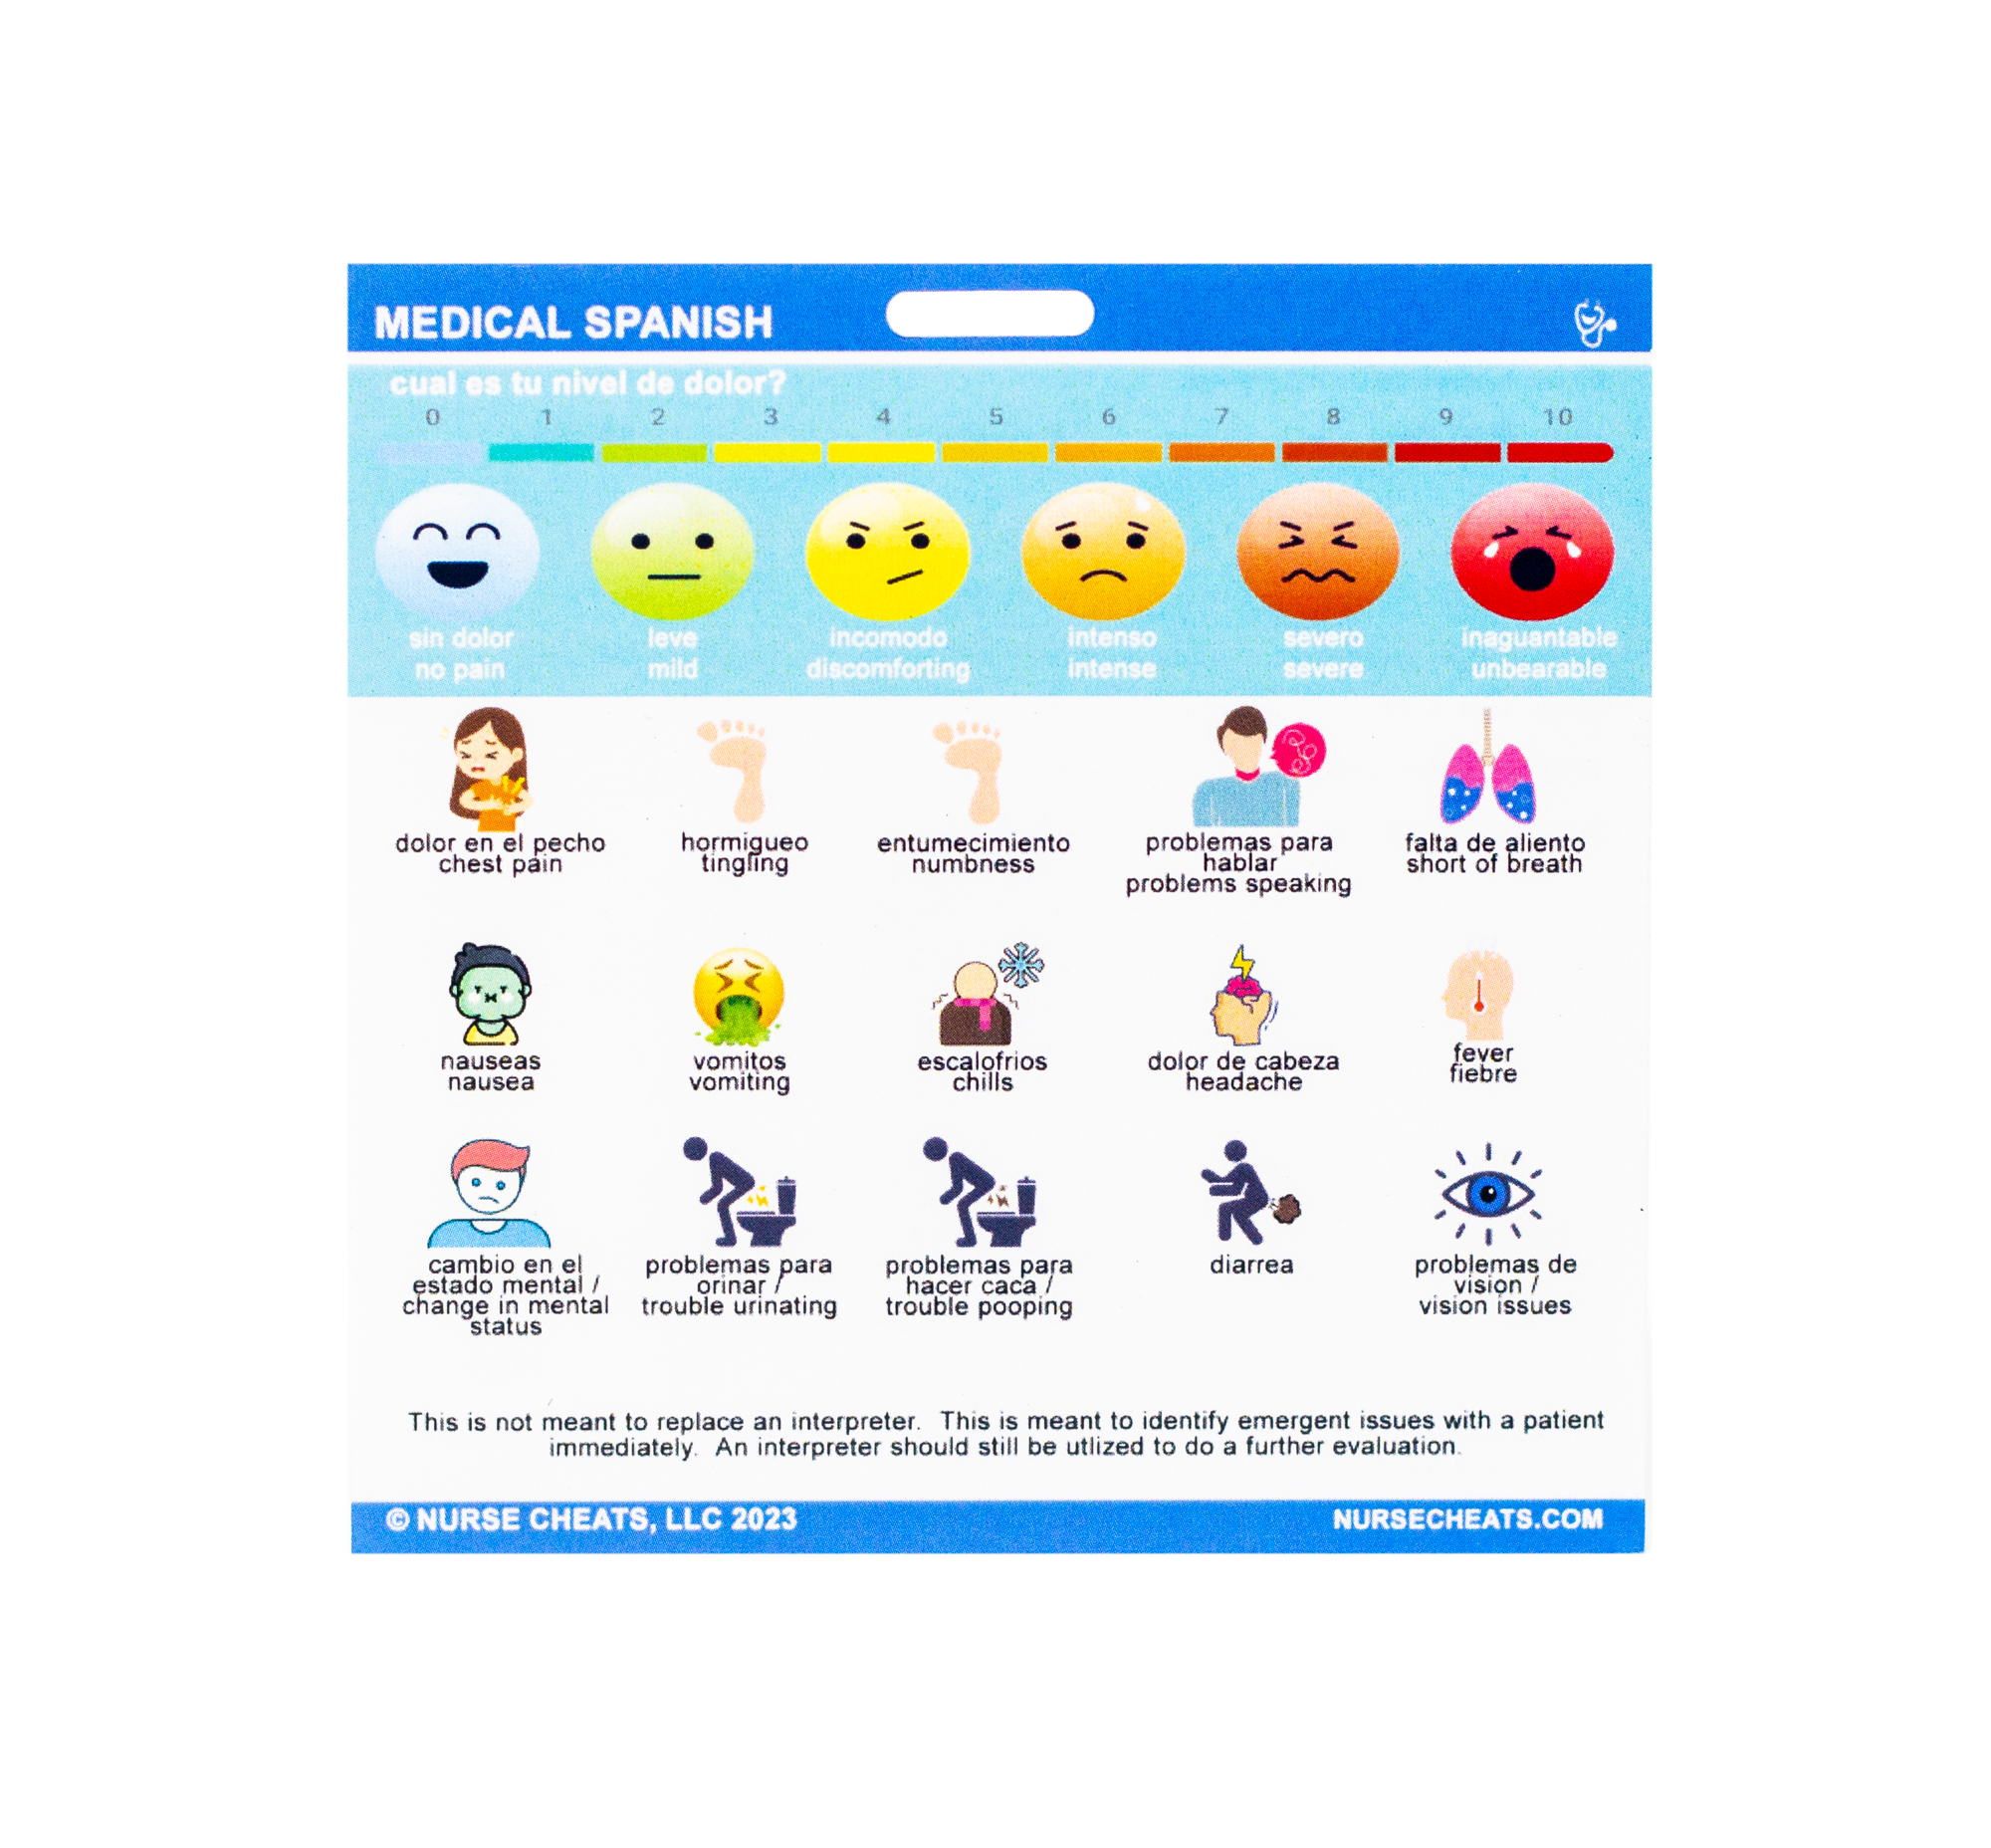 Side 1 of our medical Spanish badge buddy contains an Orientation Assessment and Problem area with pictures. 